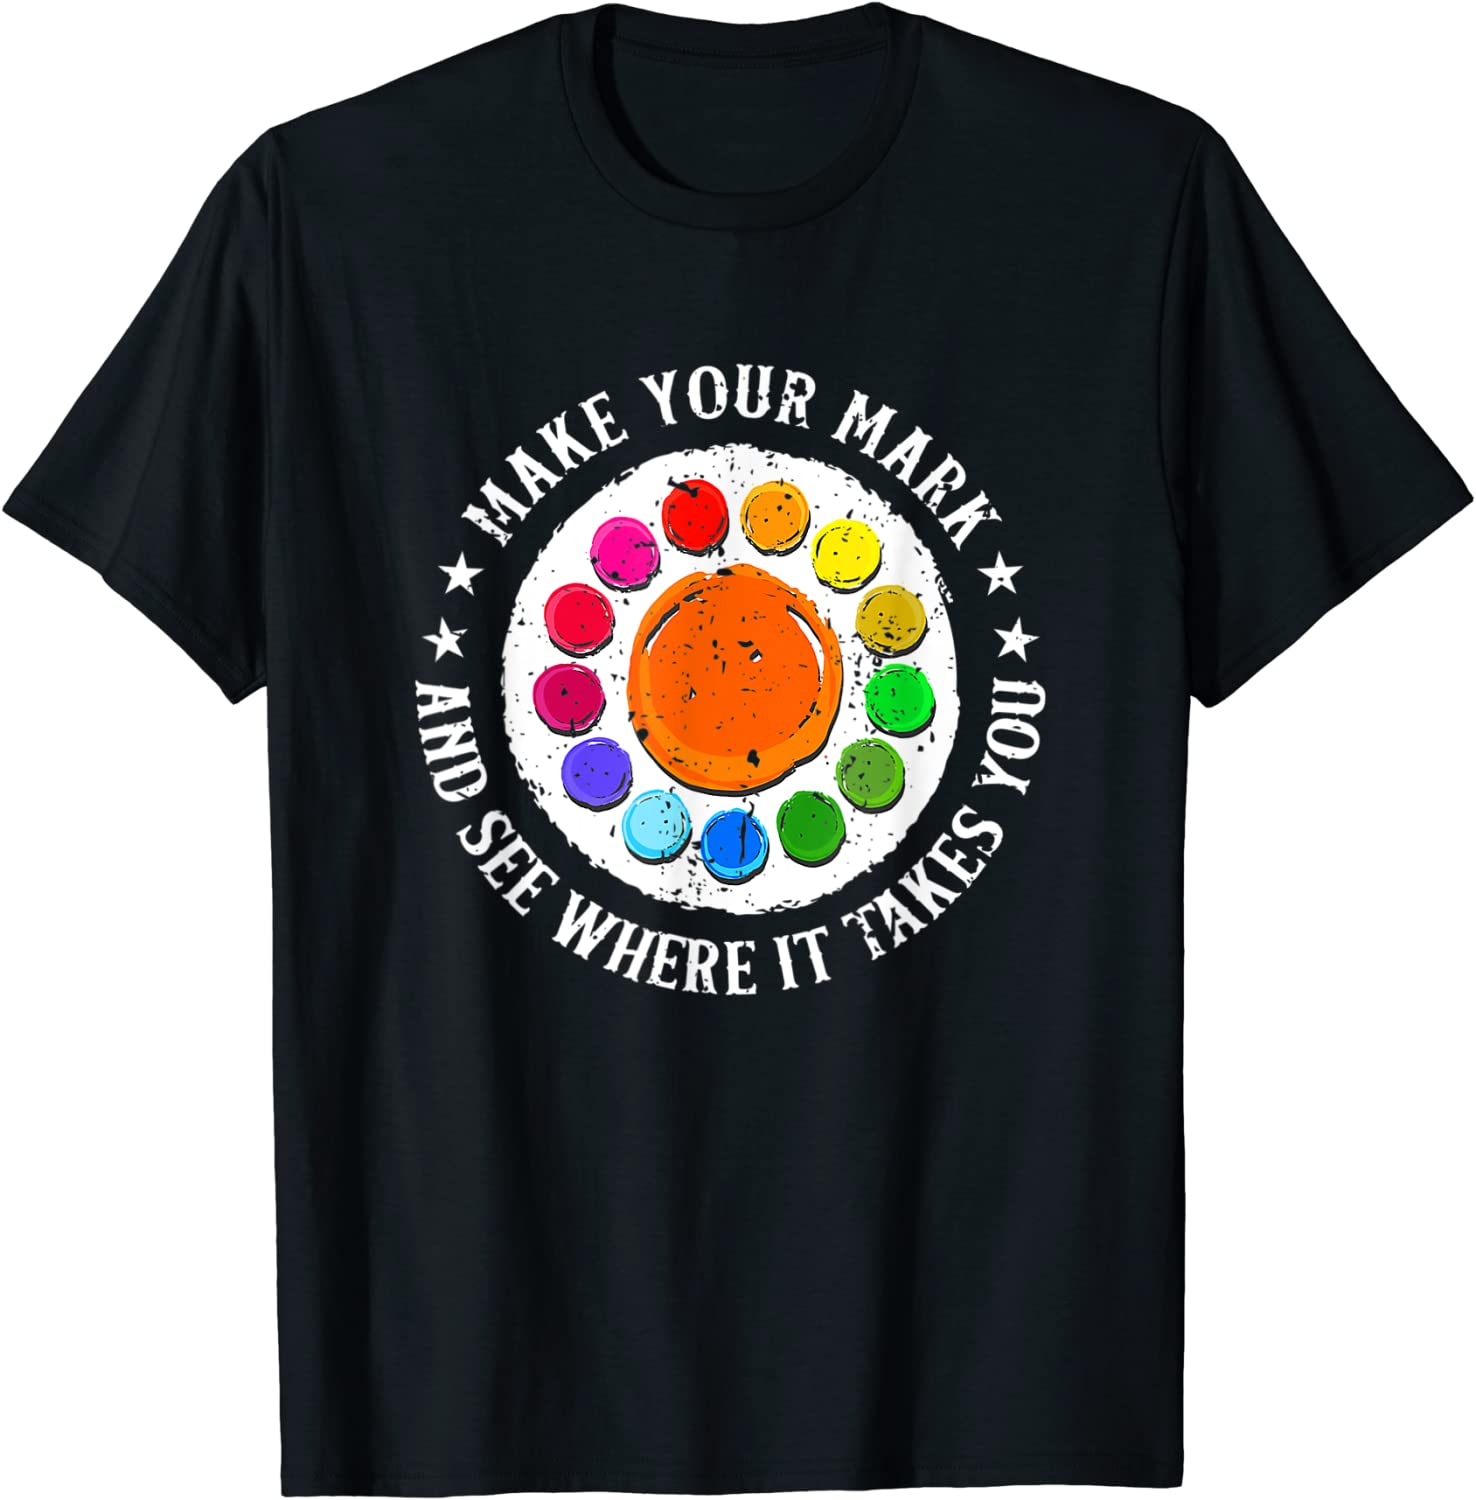 Make Your Mark And See Where It Takes You, Dot Day 2023 Shirt - Teeducks